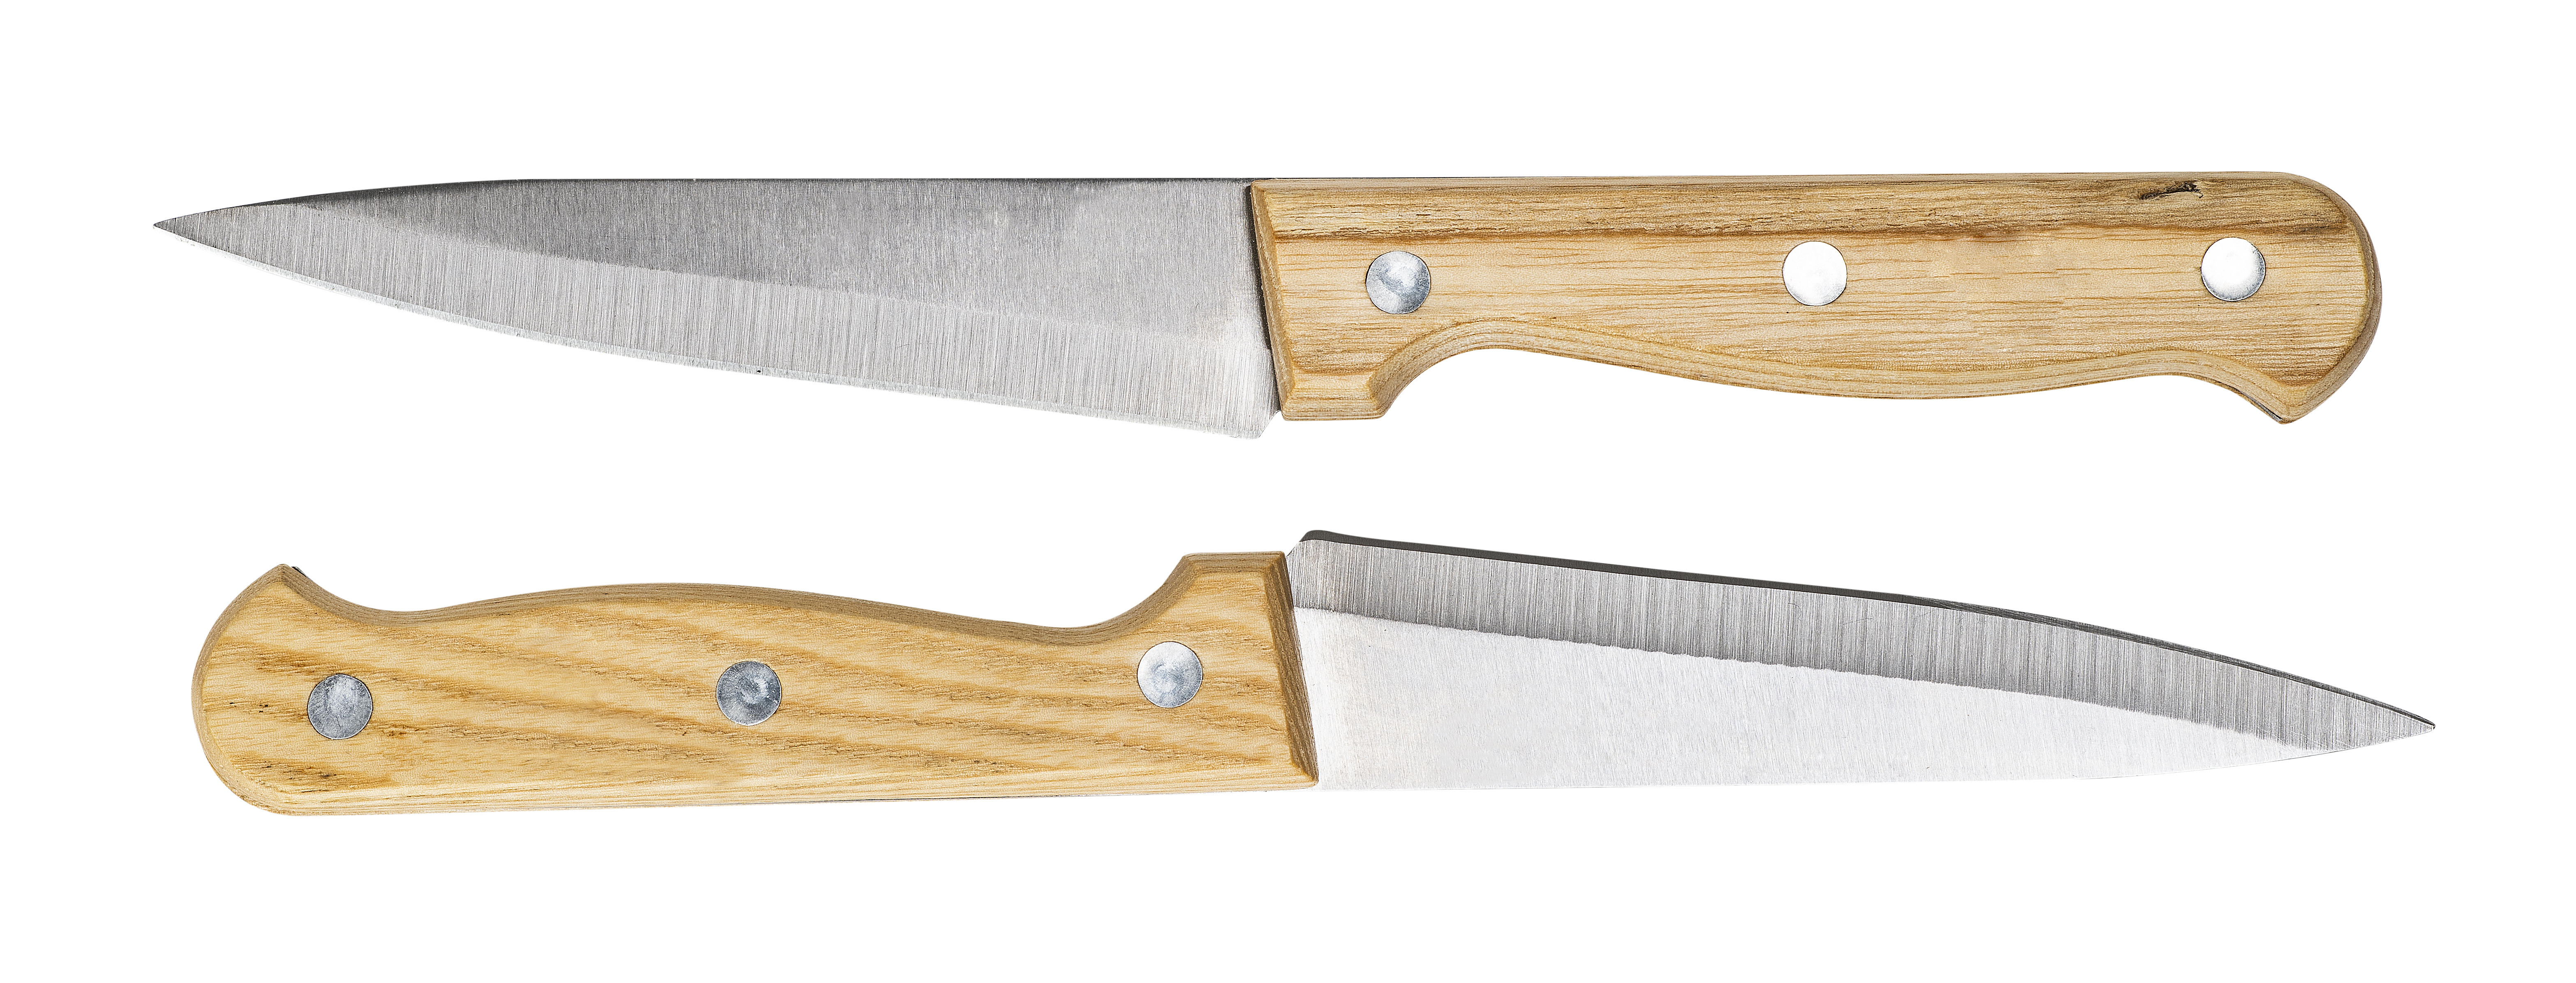 CUT folding bamboo chopping board with two knives